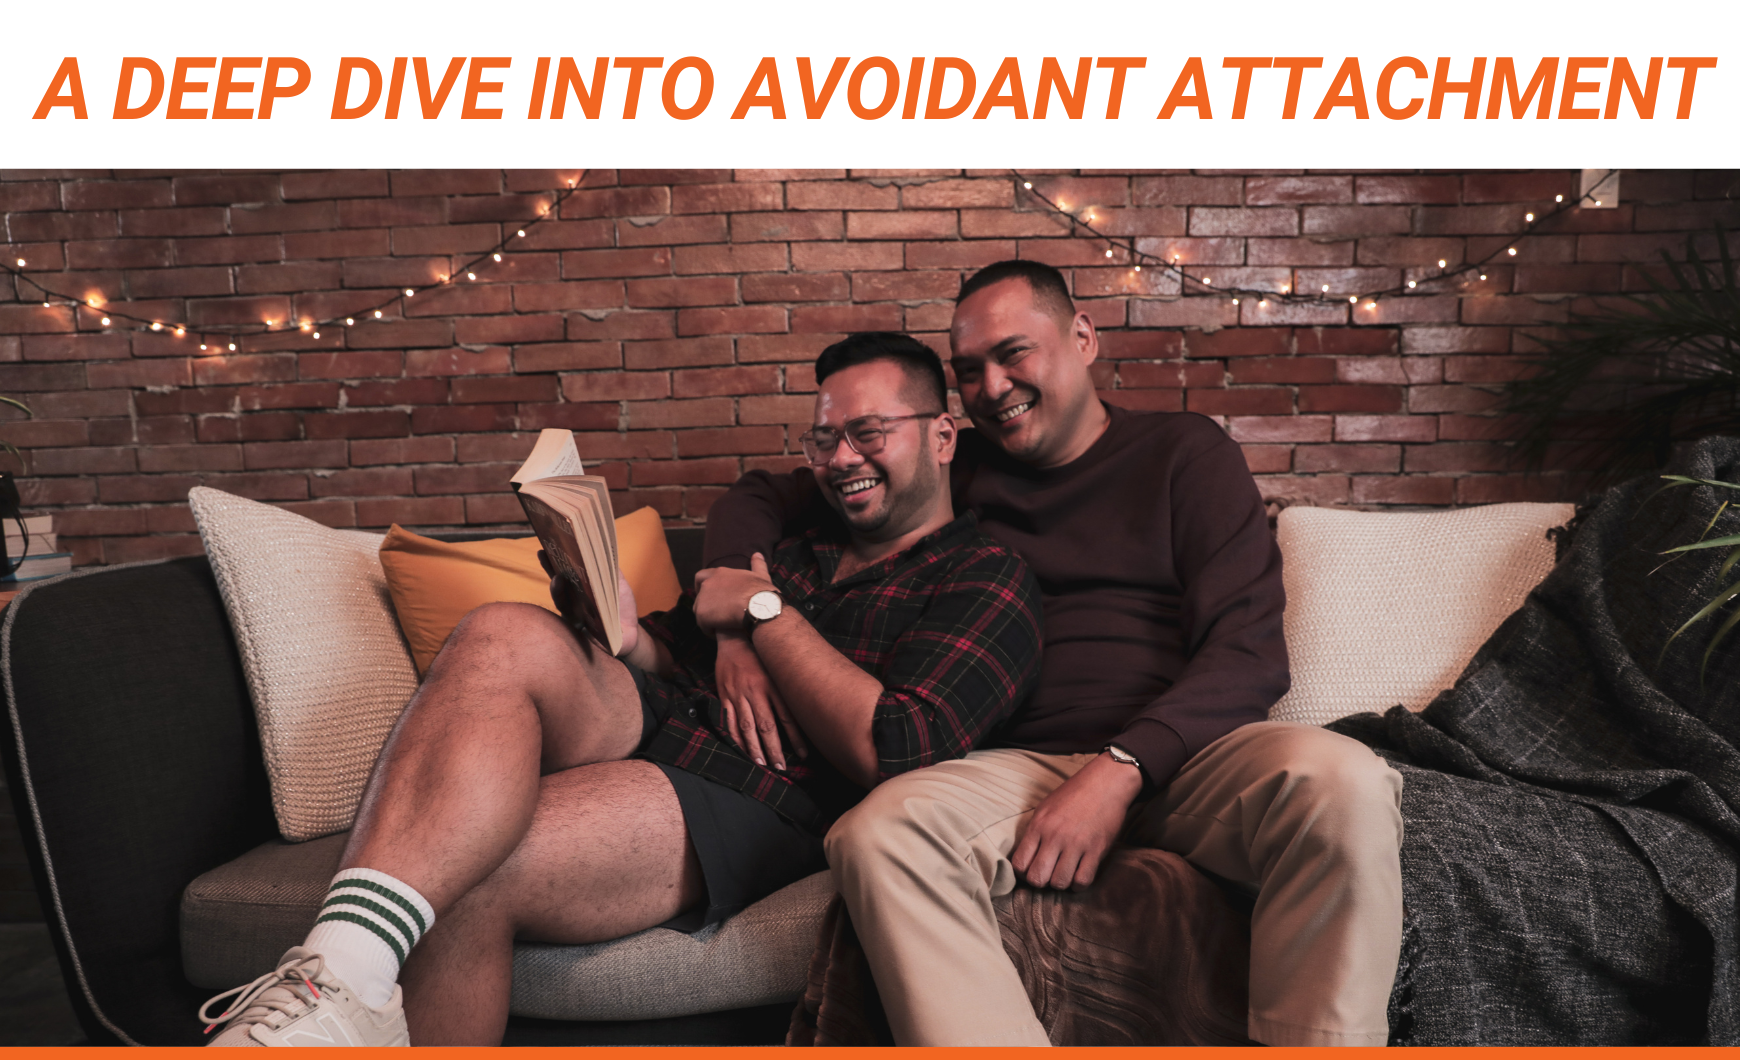 Orange text that reads "A Deep Dive Into Avoidant Attachment" above a stock photo of a happy, gay couple sitting on a couch together.